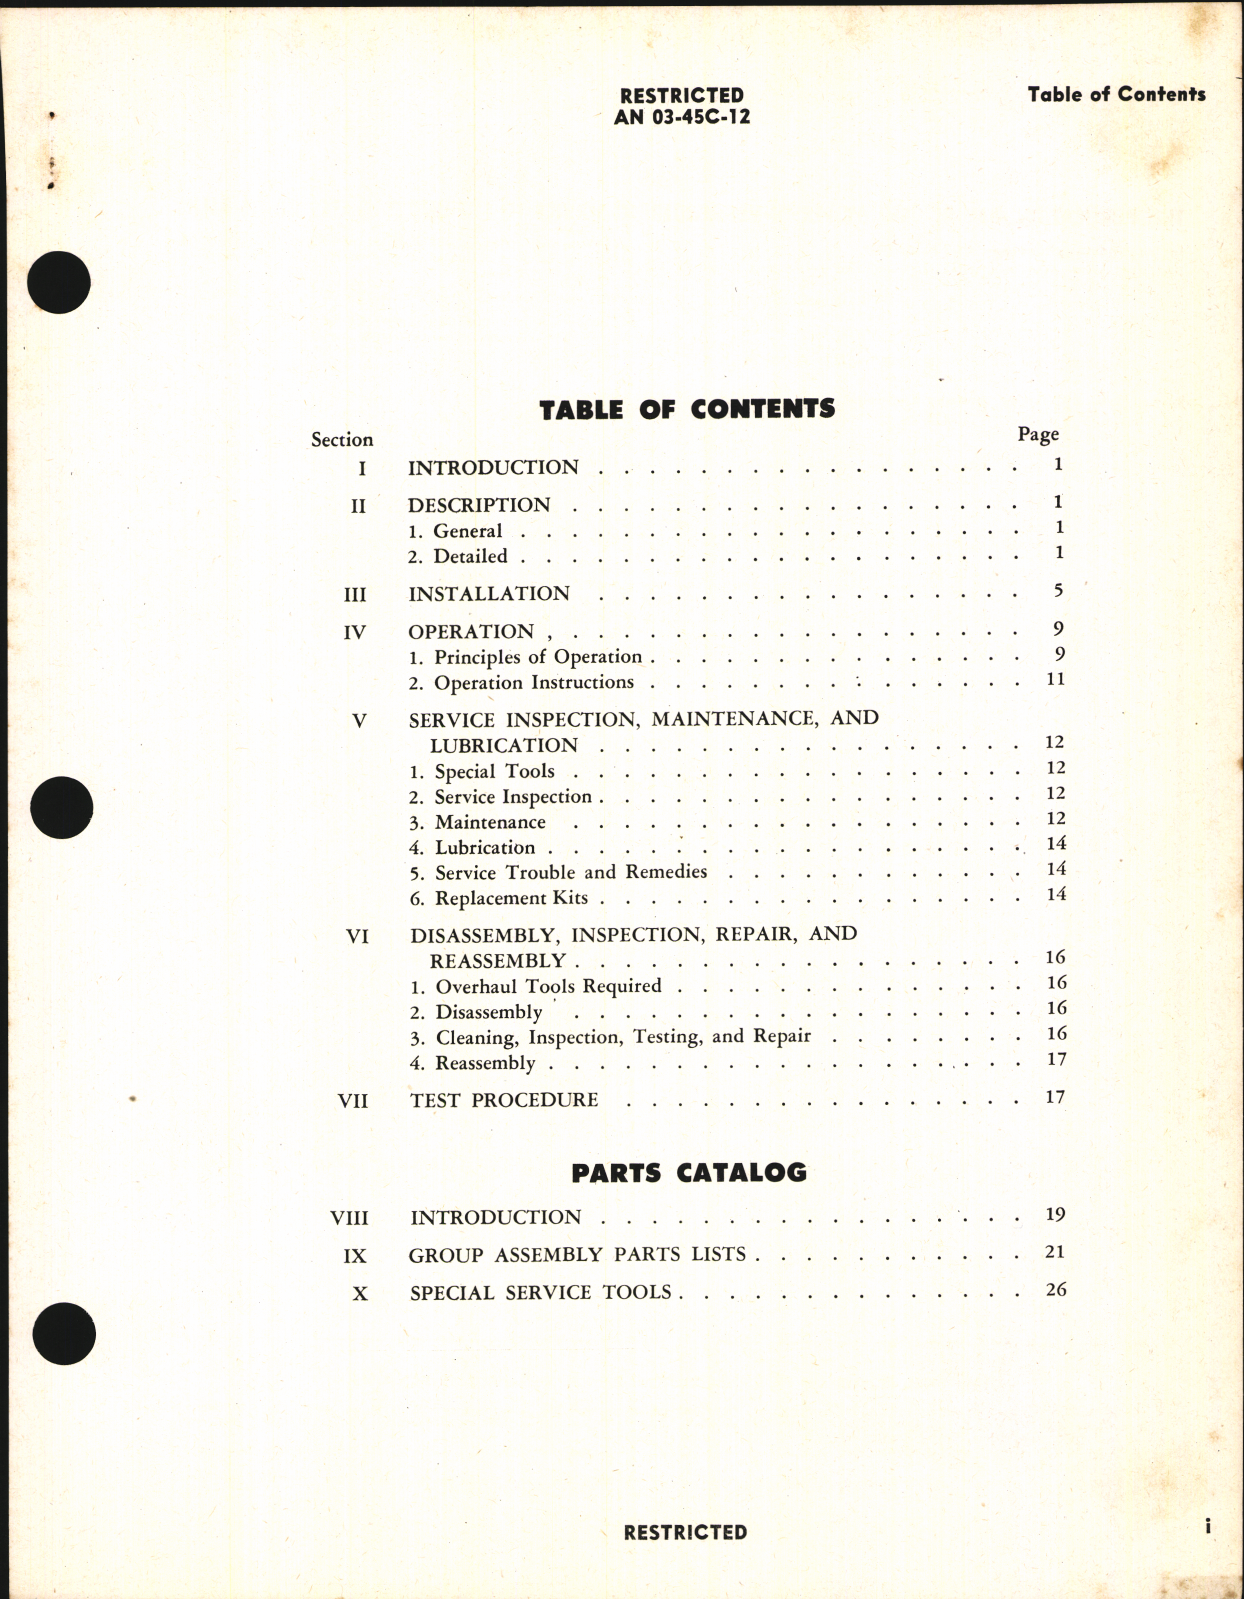 Sample page 3 from AirCorps Library document: Handbook of Instructions with Parts Catalog for Type C-46 Fire Extinguisher System